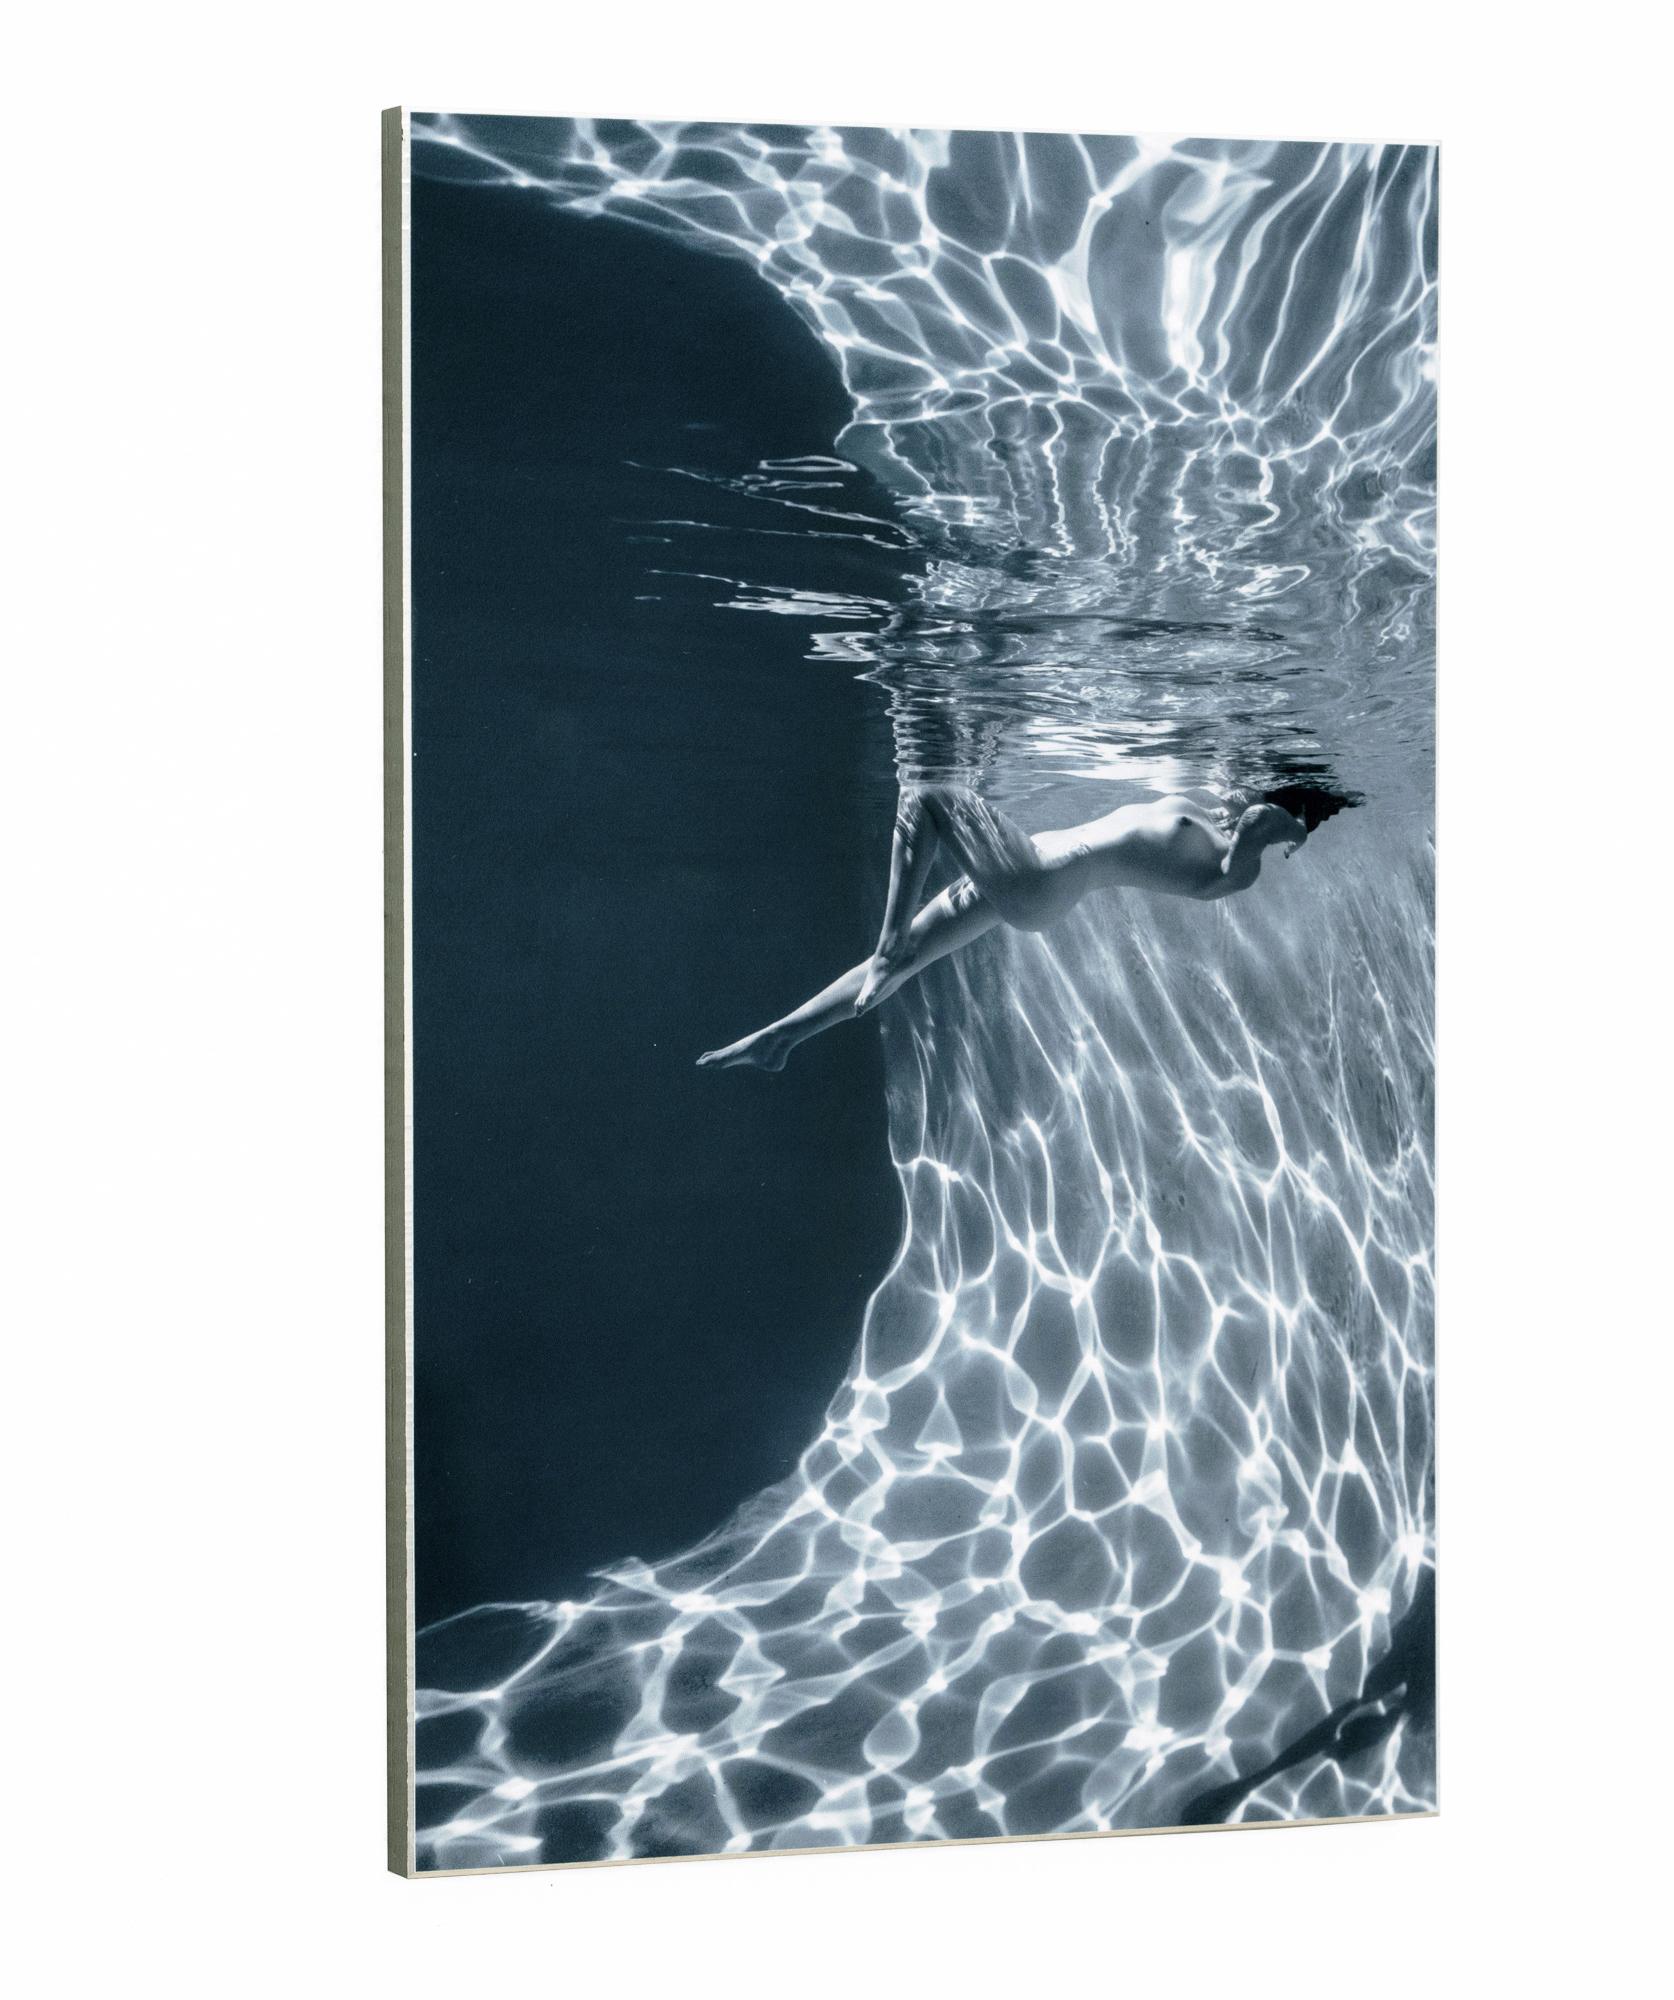 Marble Cave - underwater nude photograph - print on aluminum 12 x 8